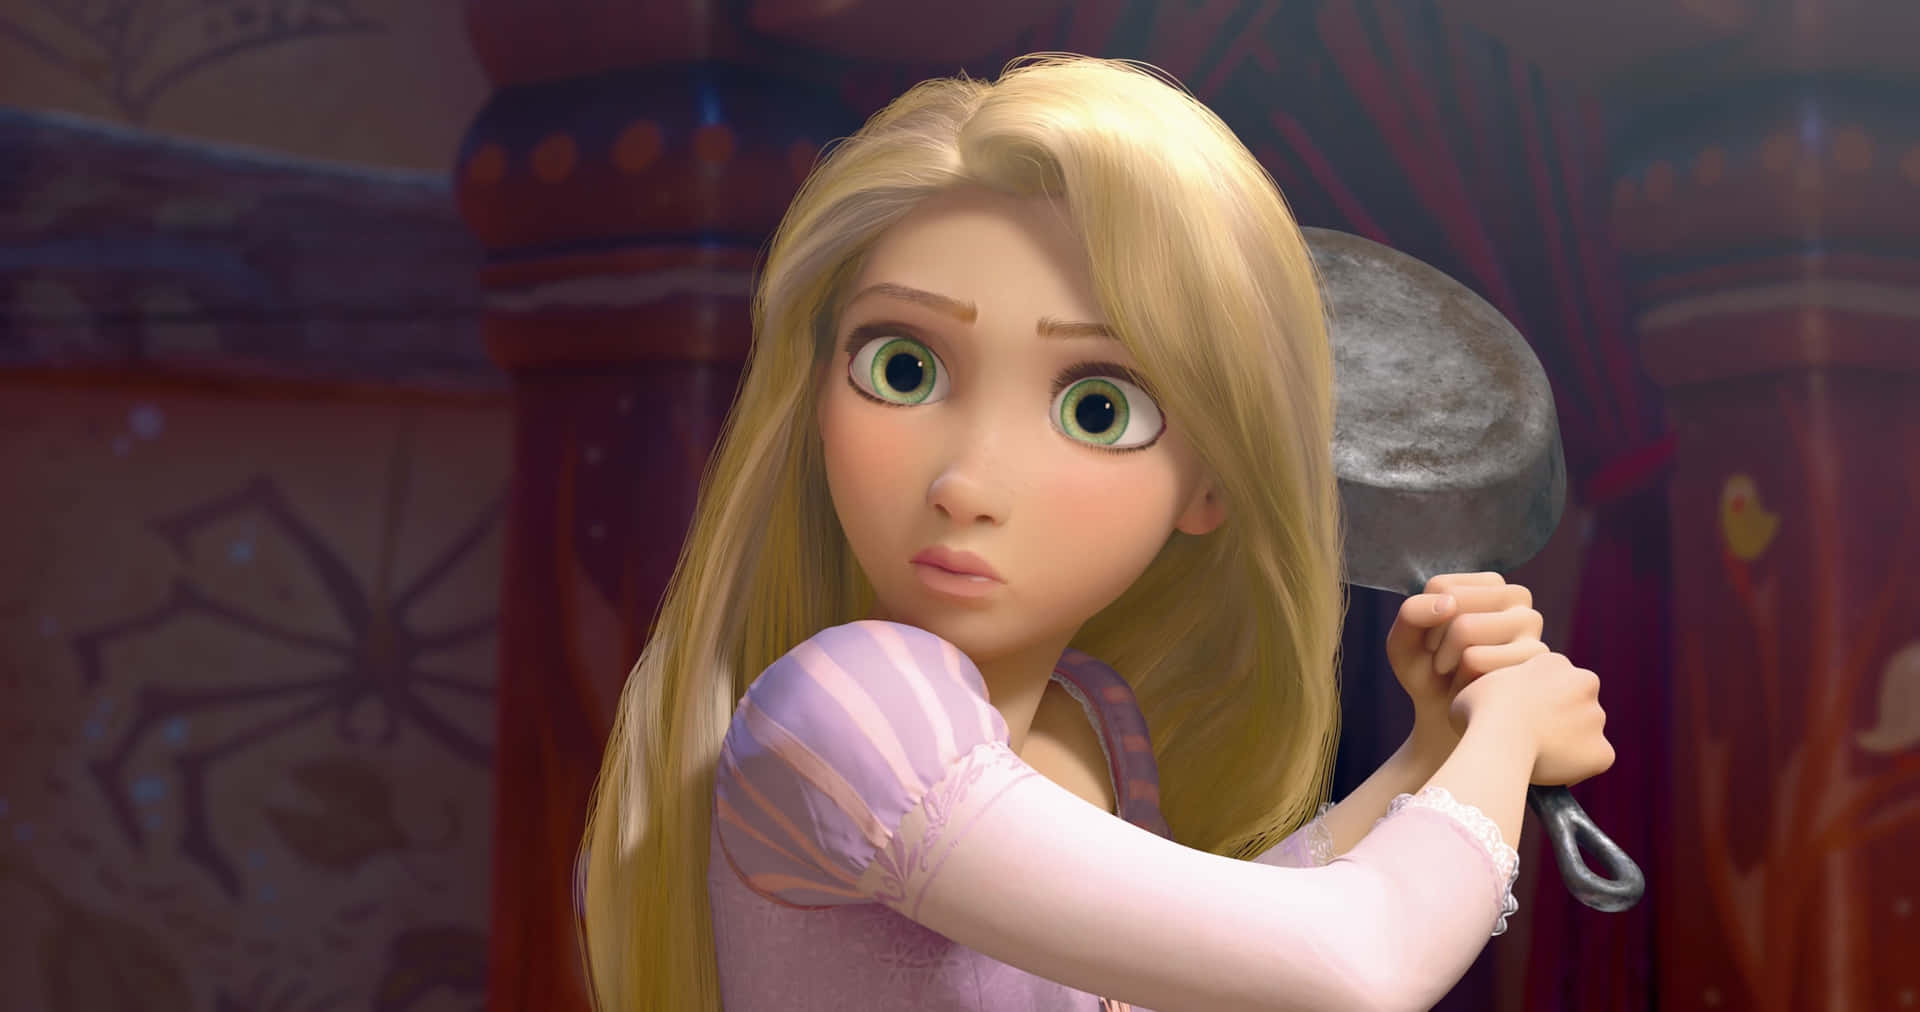 The reimagined tale of Rapunzel - Unveiling her world beyond the tower